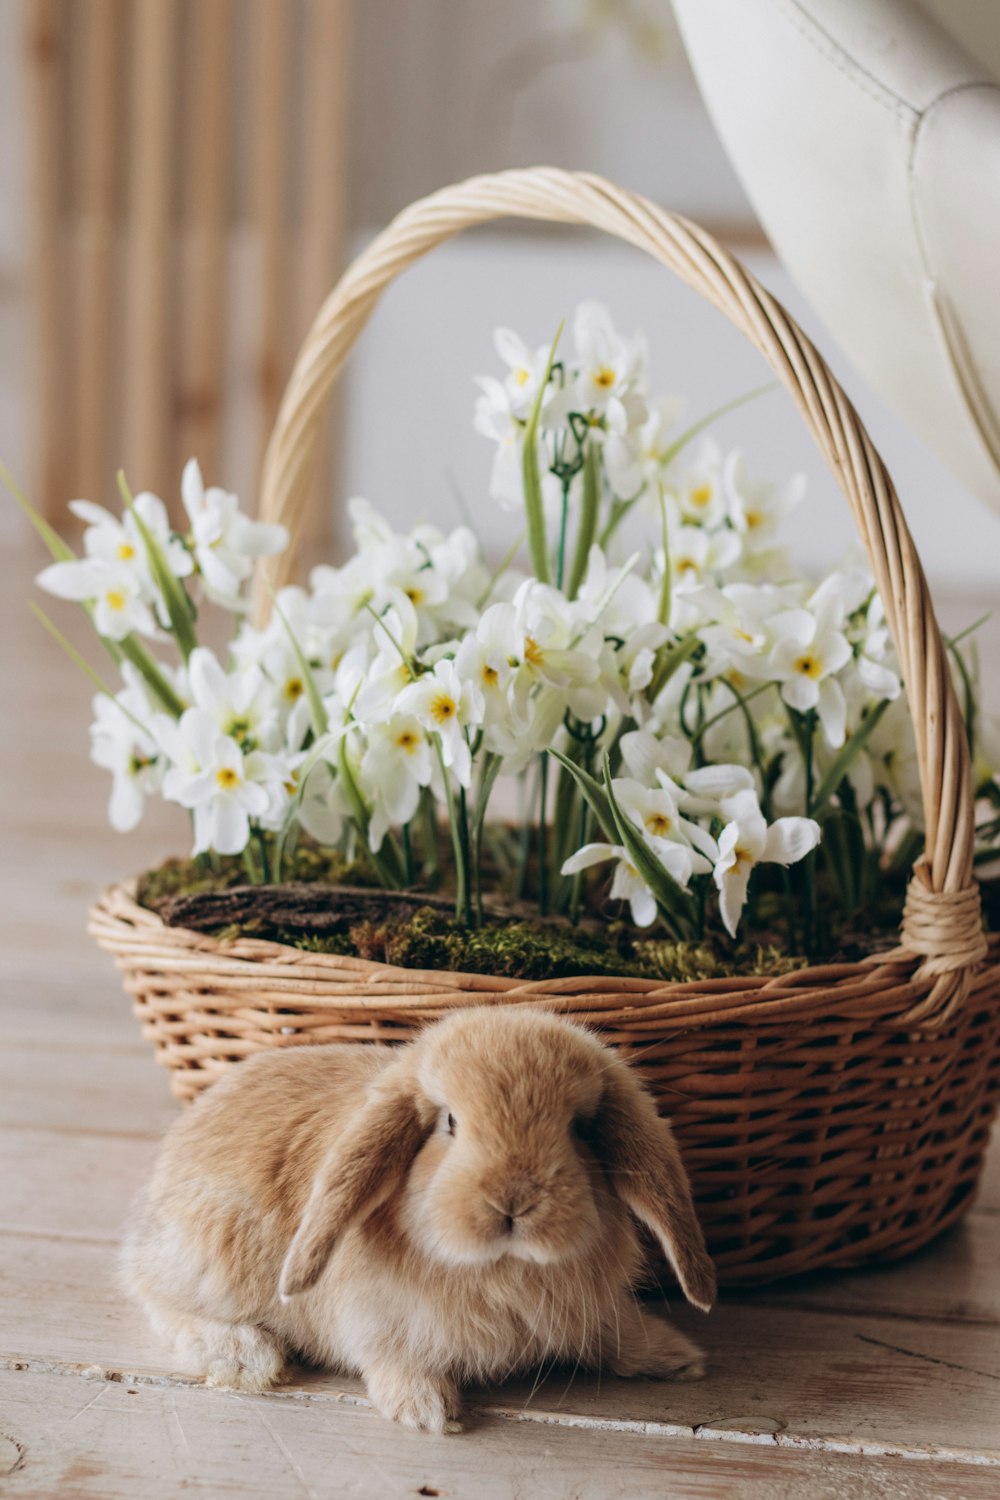 a small rabbit sitting next to a basket of flowers